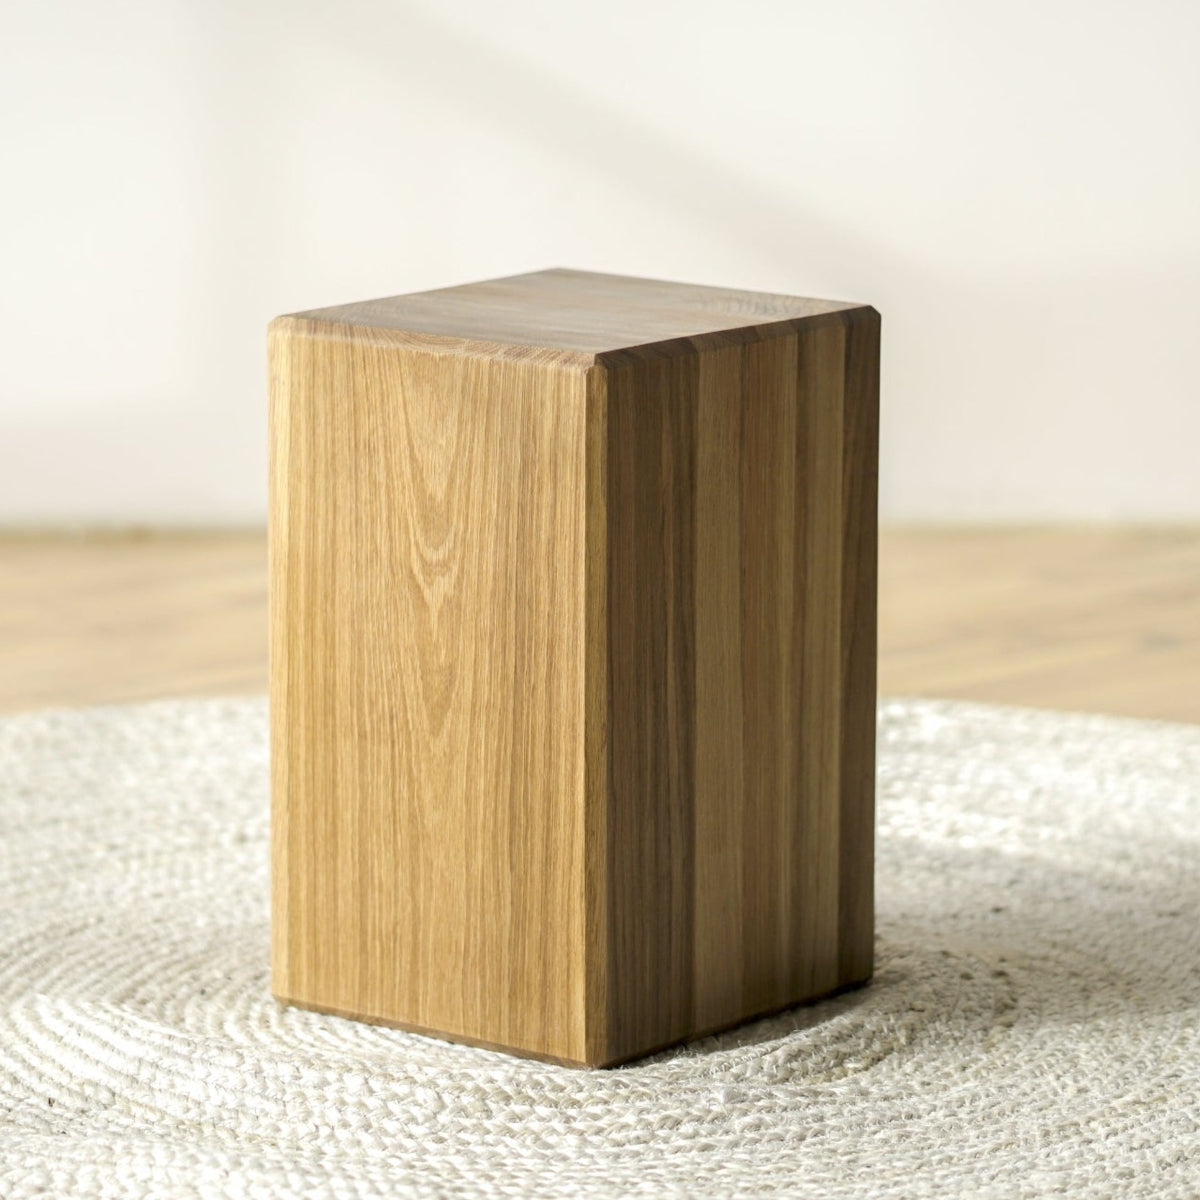 Monolith Side Table